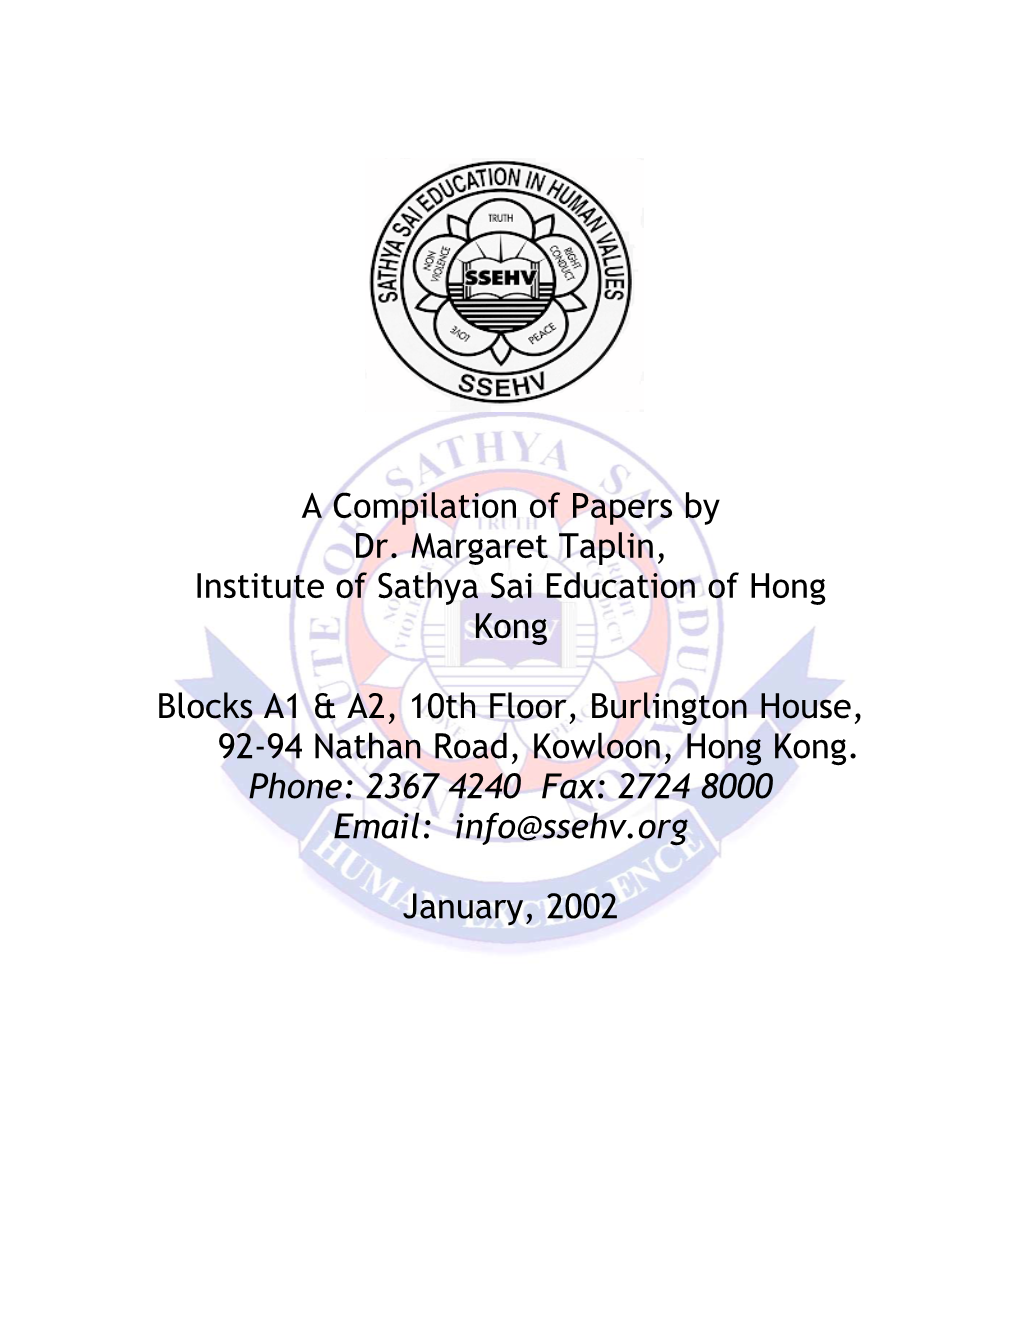 A Compilation of Papers by Dr. Margaret Taplin, Institute of Sathya Sai Education of Hong Kong